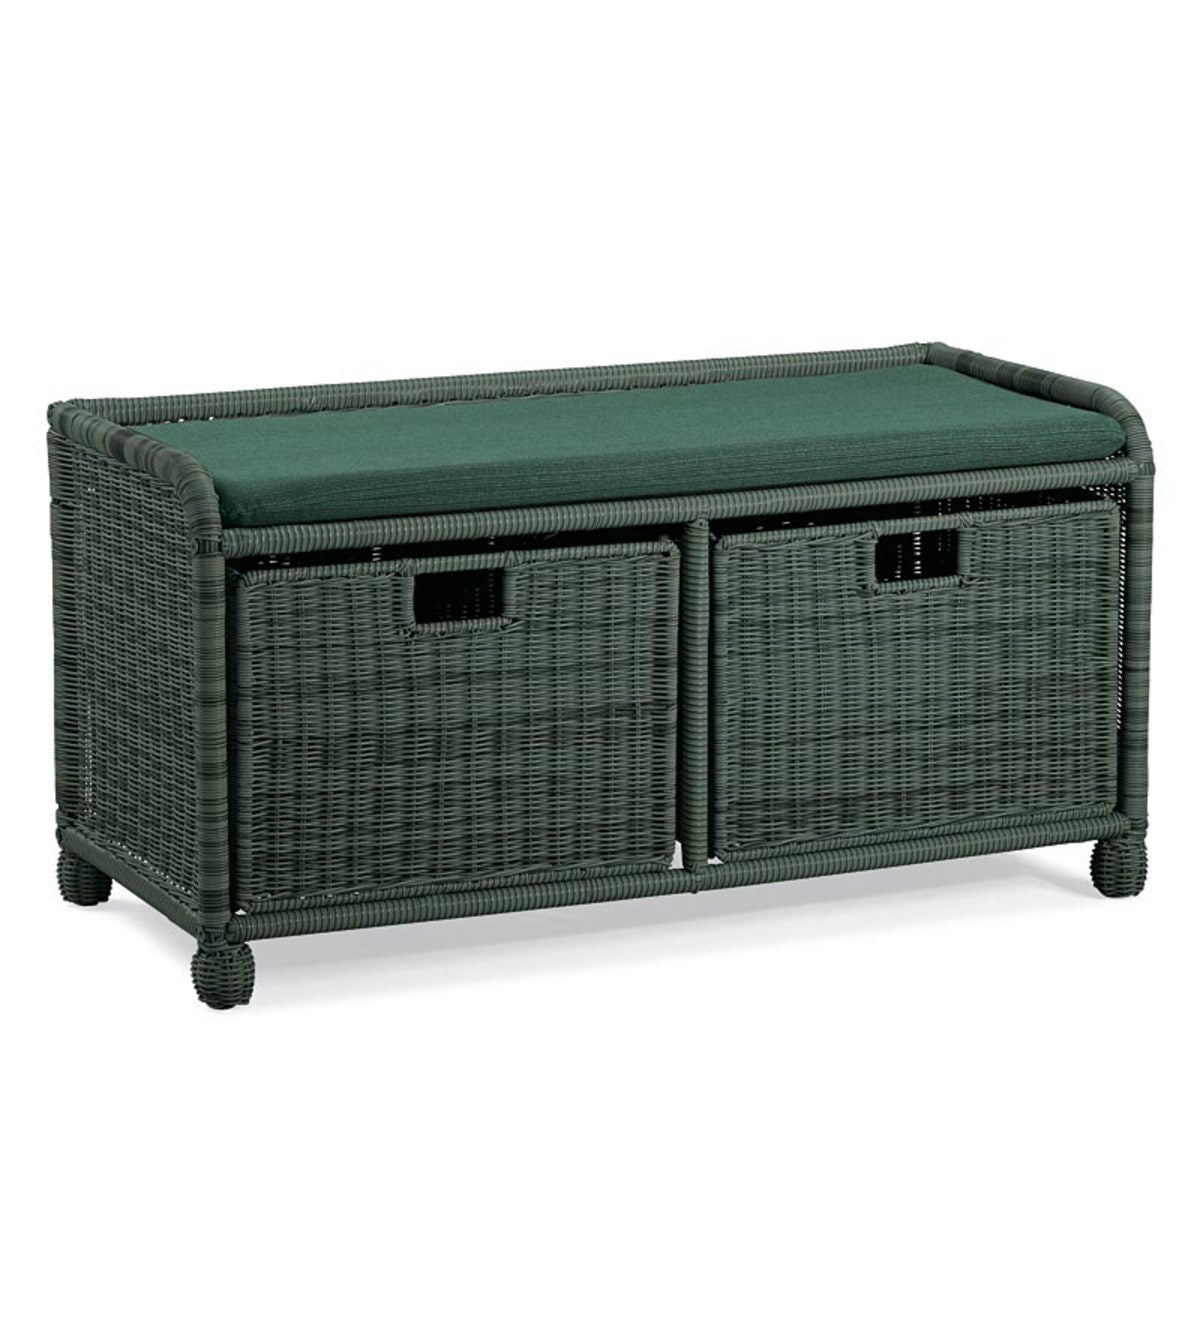 Easy Care Outdoor Resin Wicker Storage Bench - Green | PlowHearth